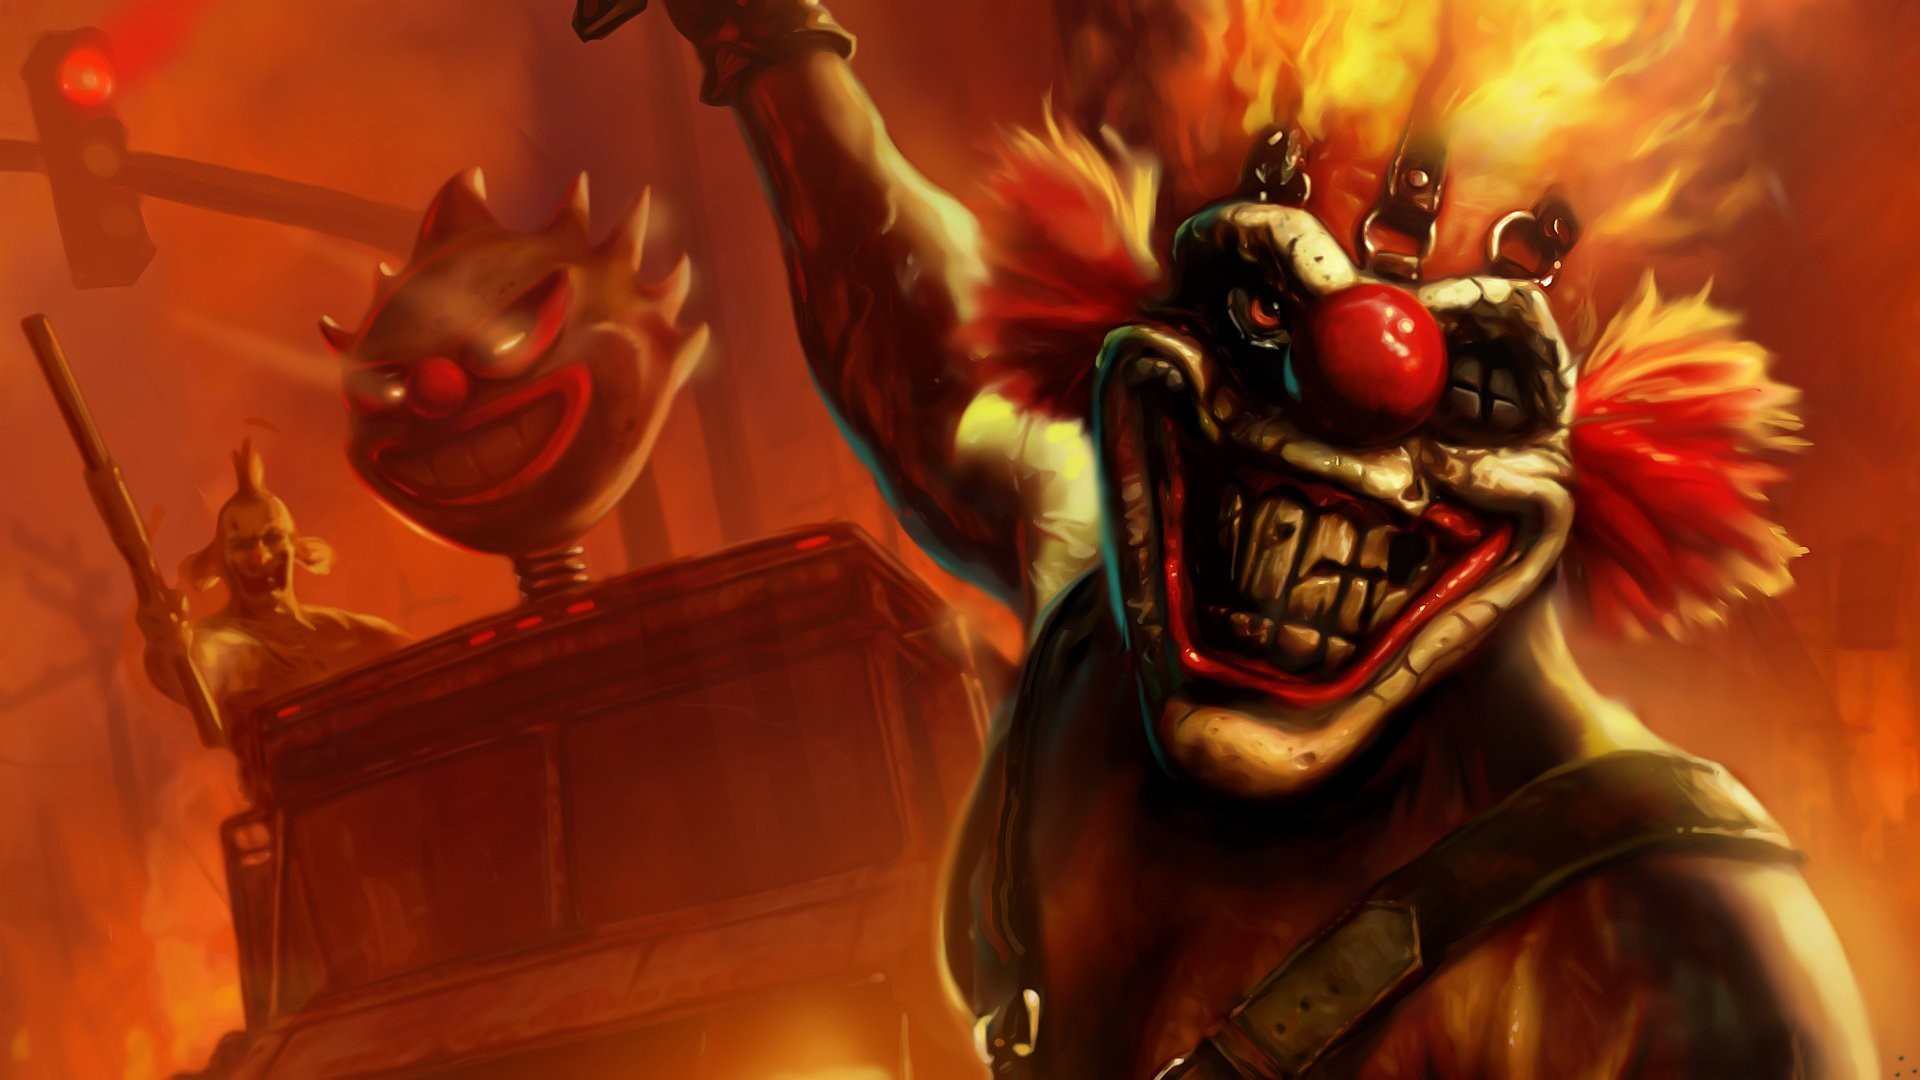 1920x1080 Video Game - Twisted Metal Wallpaper